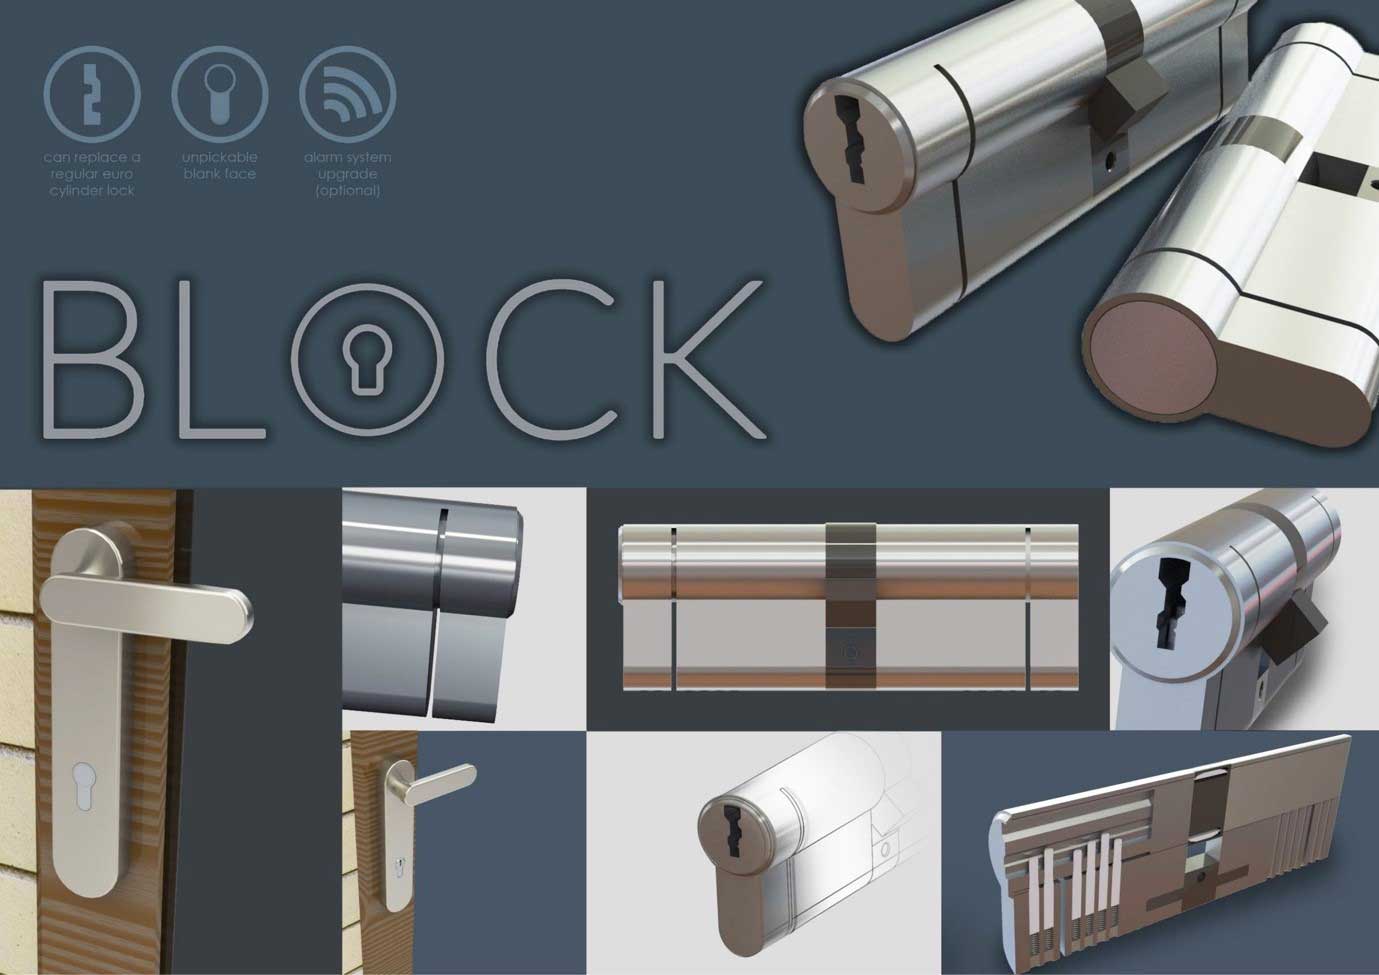 Graphic showing an anti-theft lock design